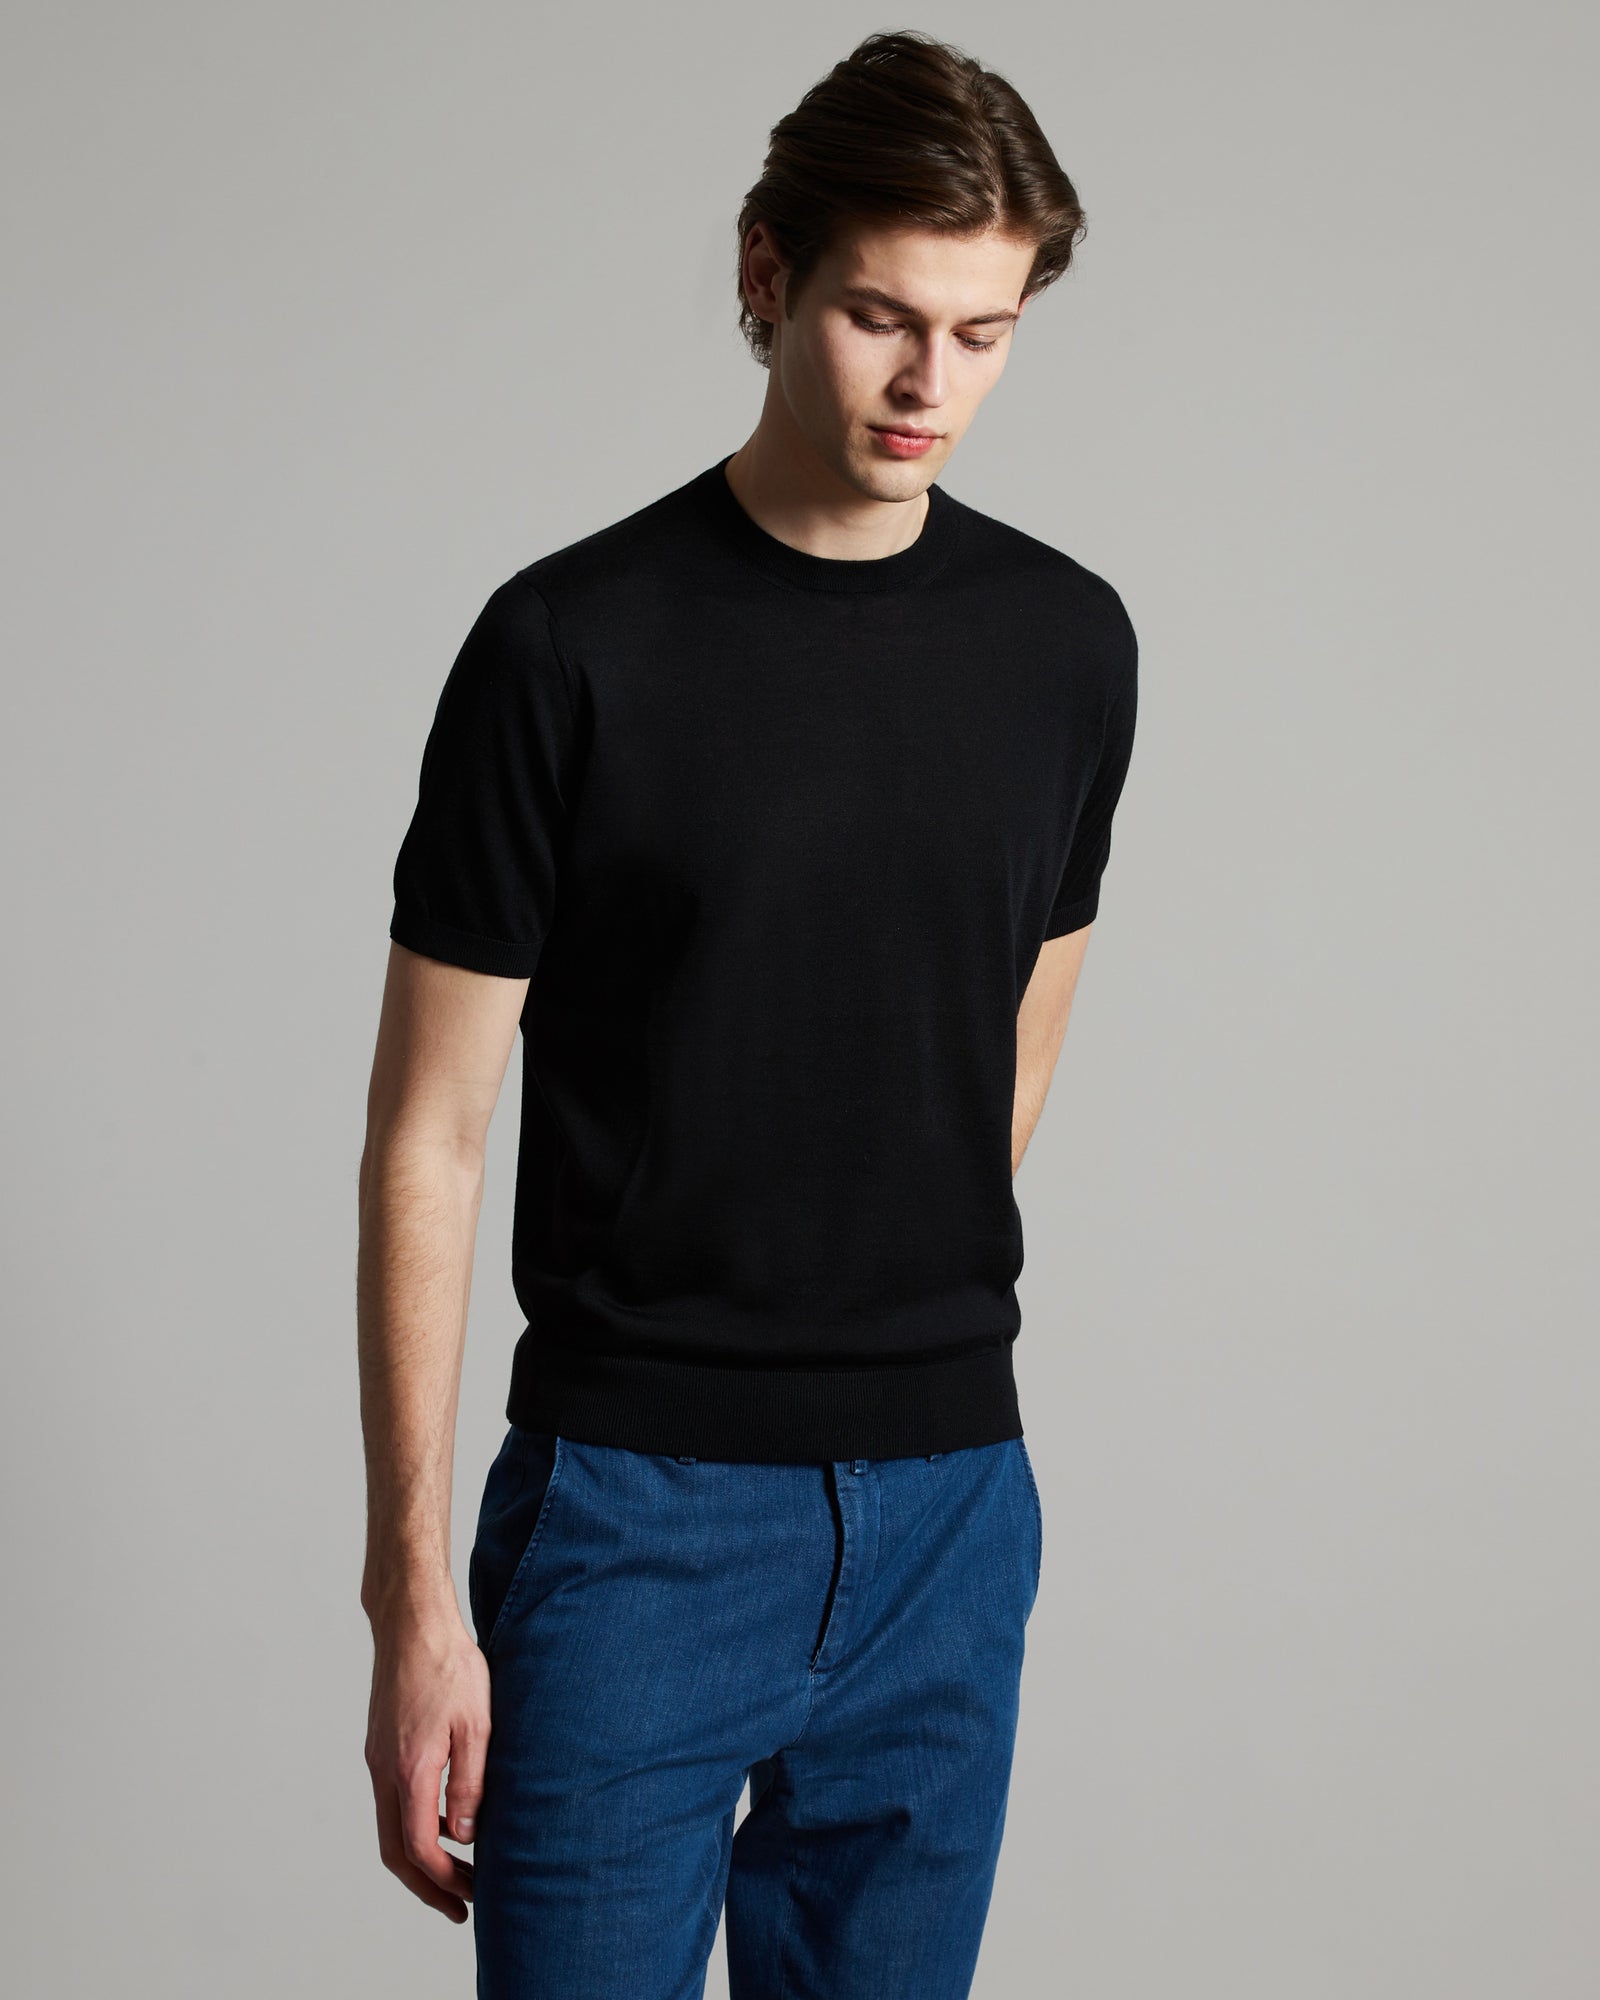 Black cashmere and silk men's T-SHIRT